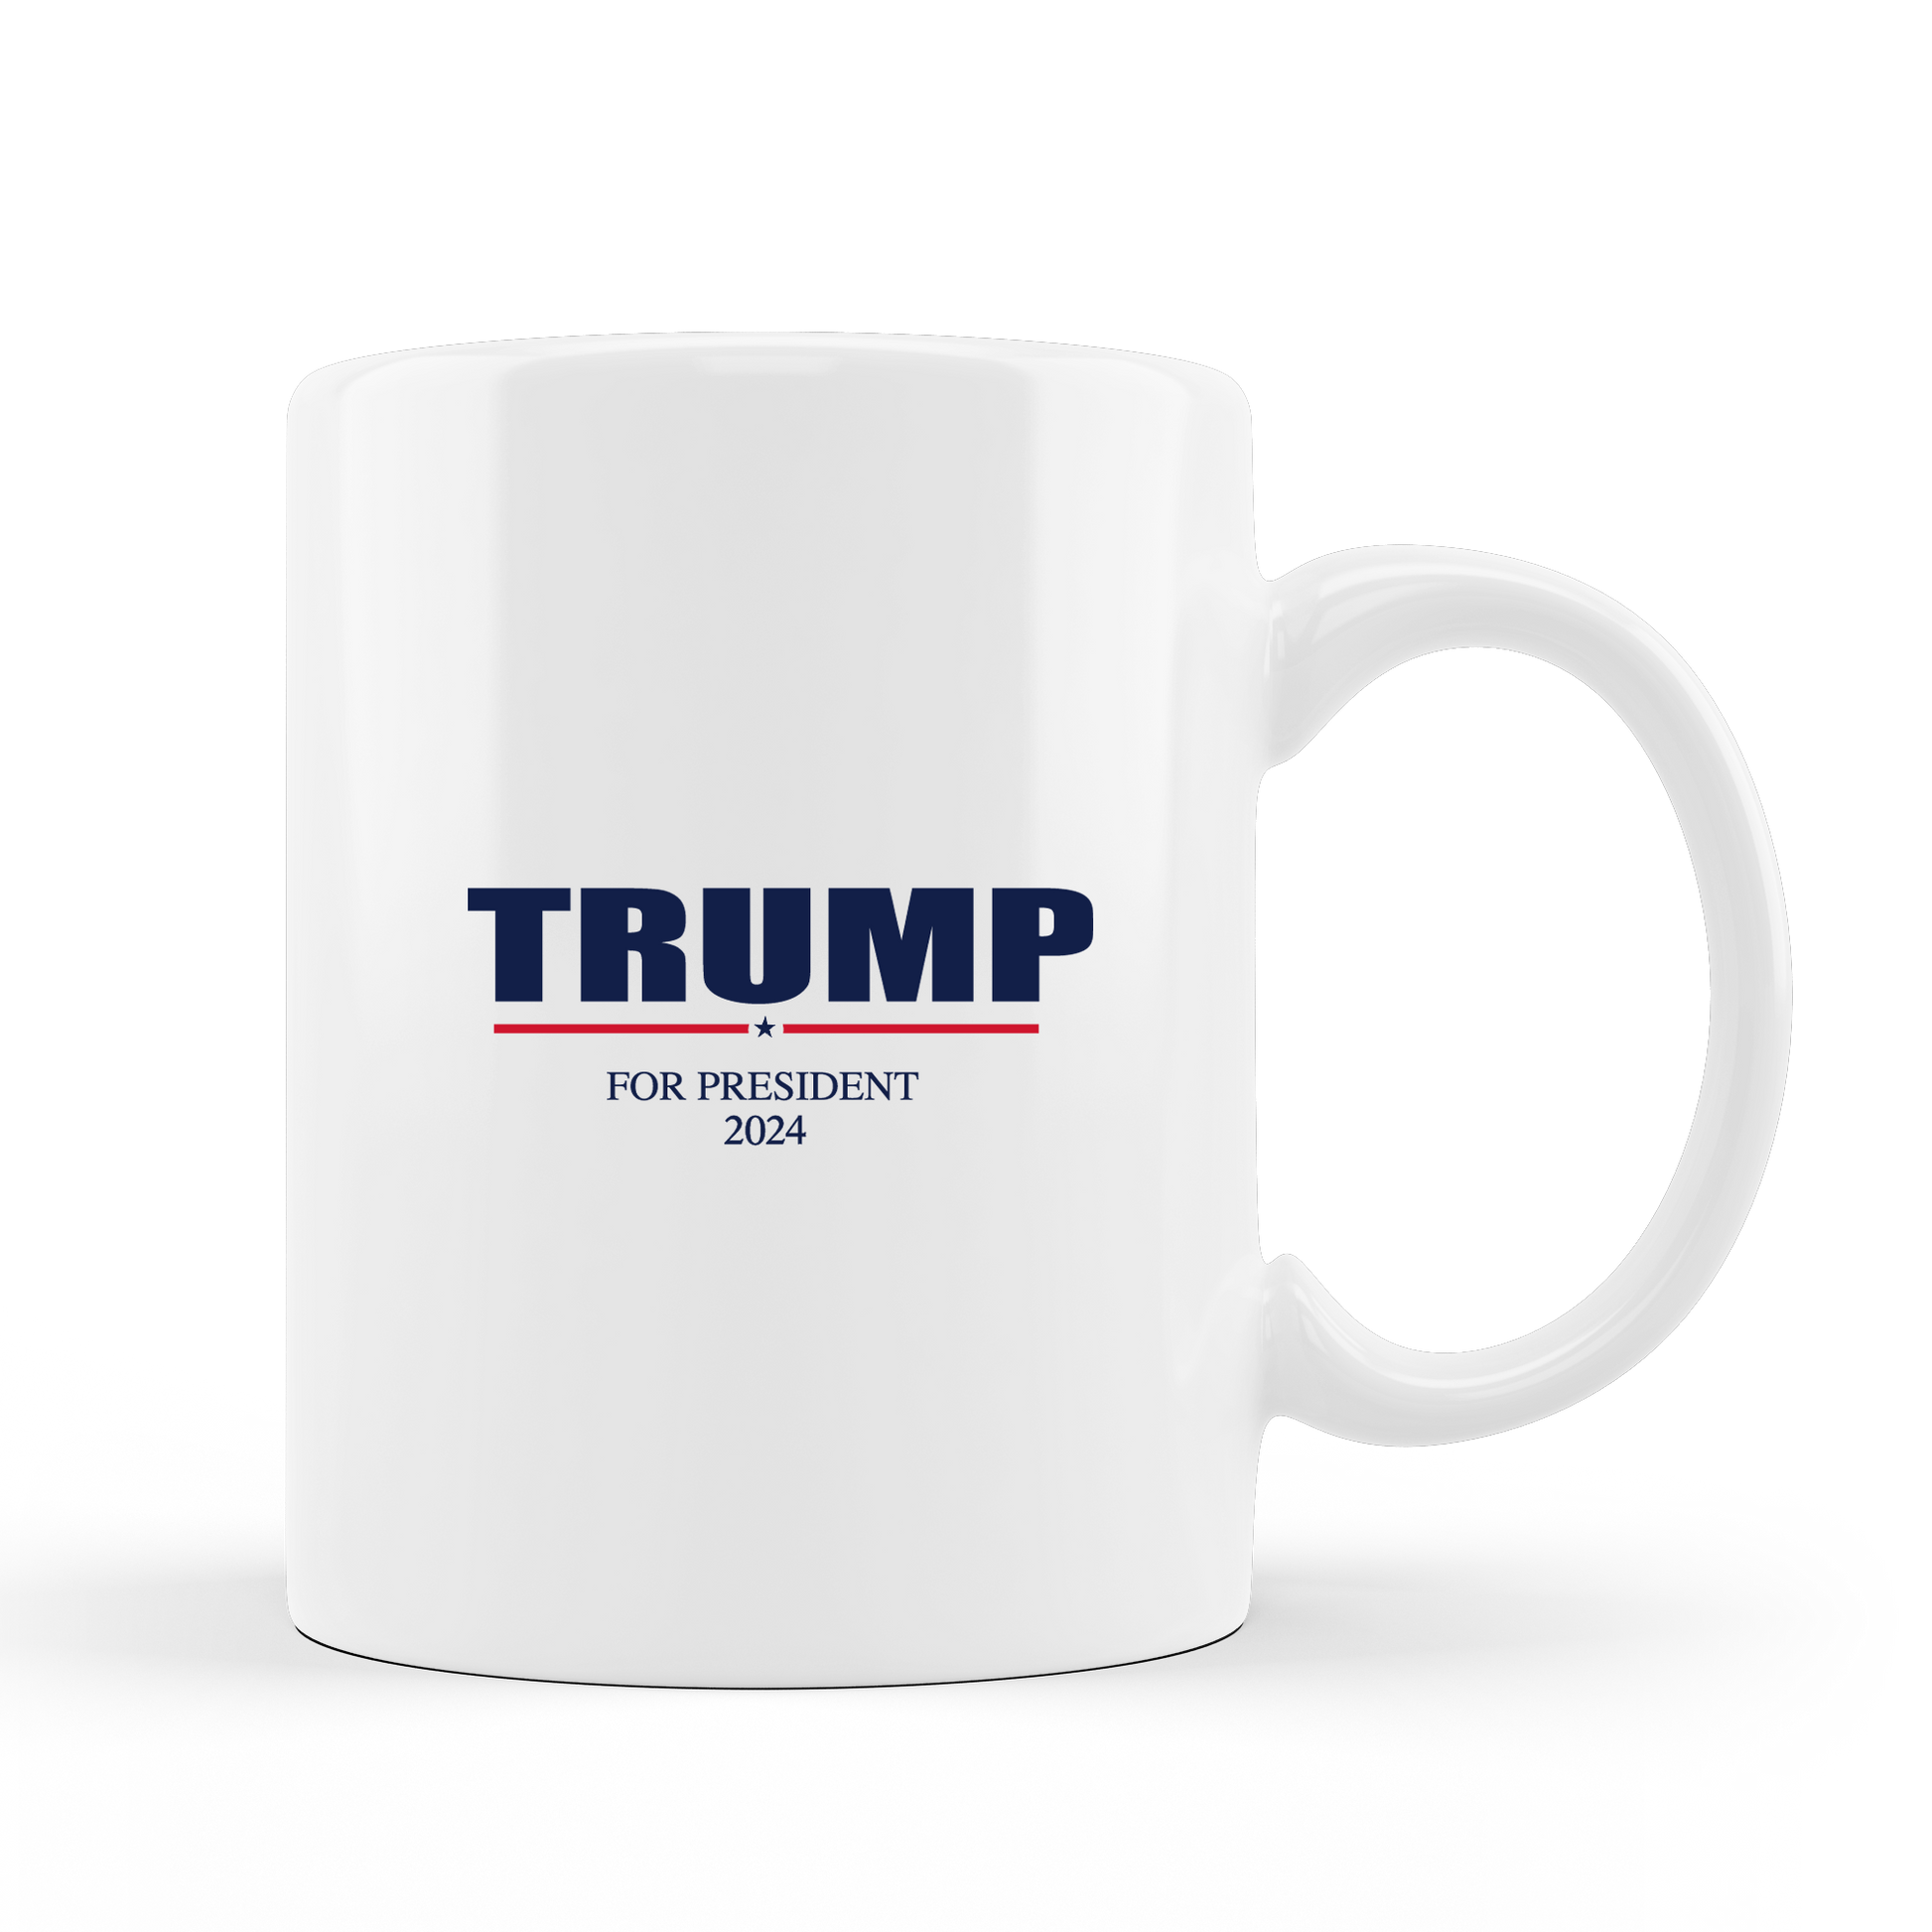 The Best Coffee Mugs of 2024, According to an Expert